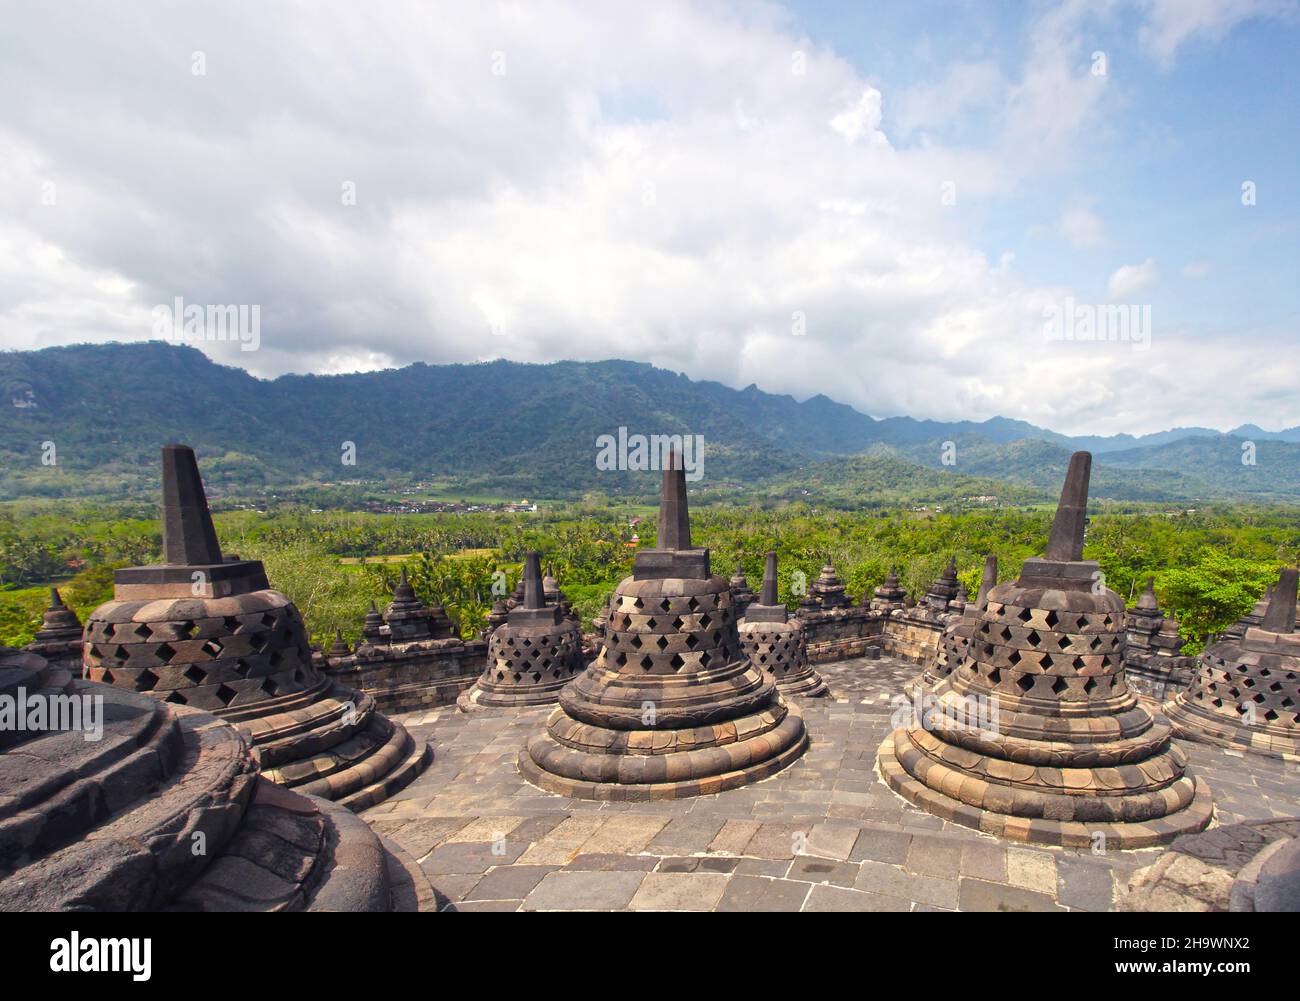 Candi Borobudur or Borobudur Temple in Magelang, Central Java, Indonesia, which was built in the 7th Century AD. Stock Photo